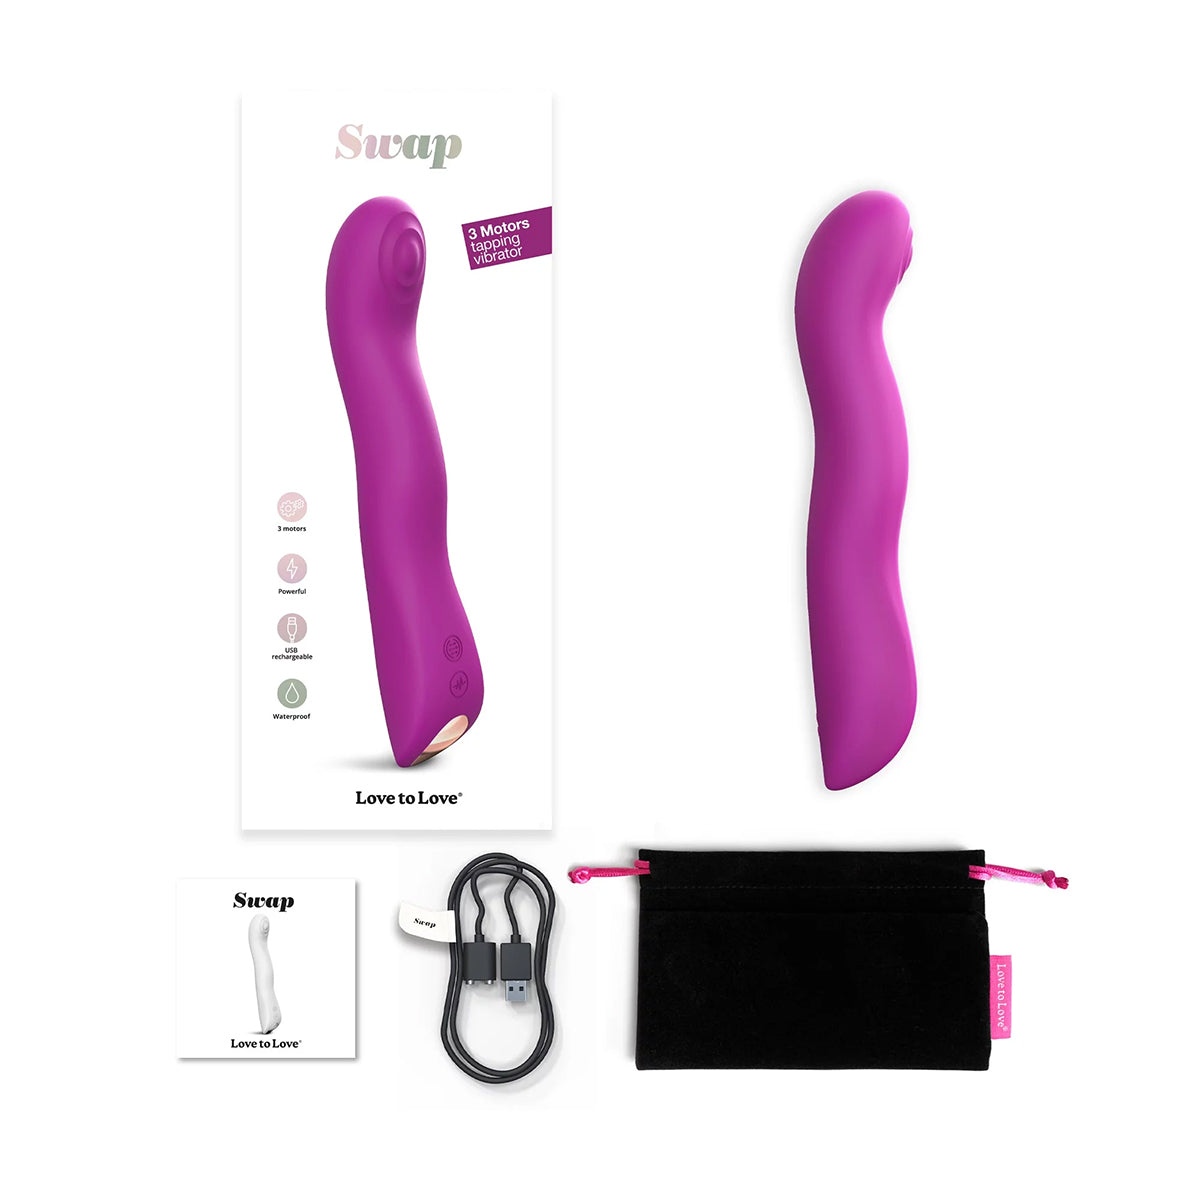 Love to Love Swap Tapping Vibrator - Sweet Orchid